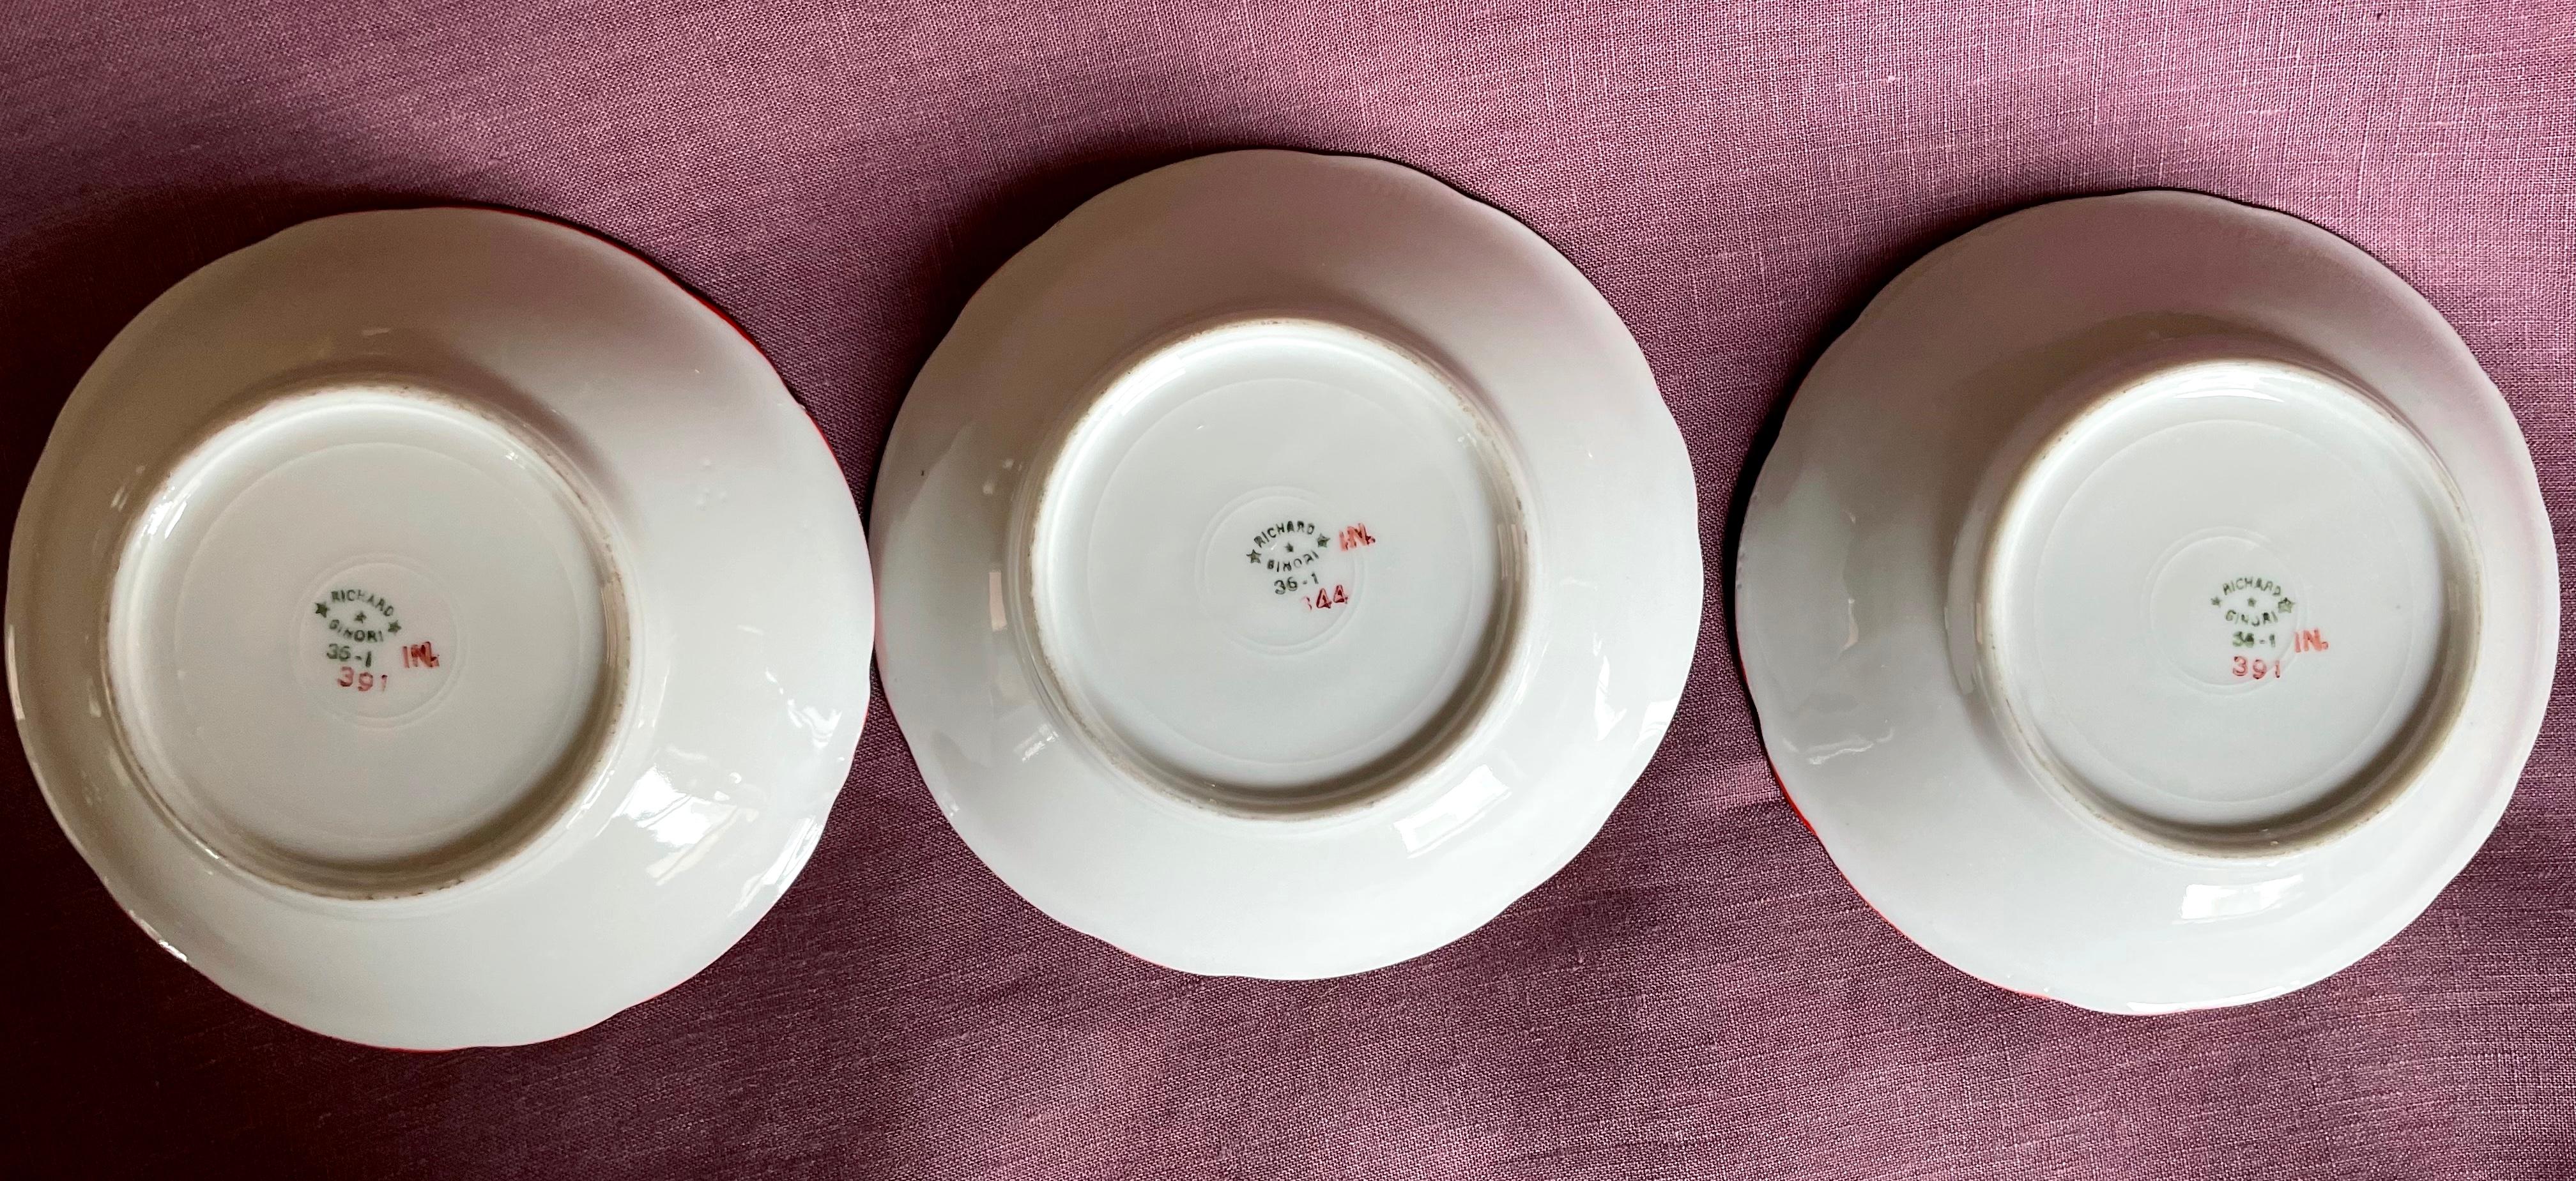 Gio Ponti for Ginori Athletic Dish In Good Condition For Sale In New York, NY